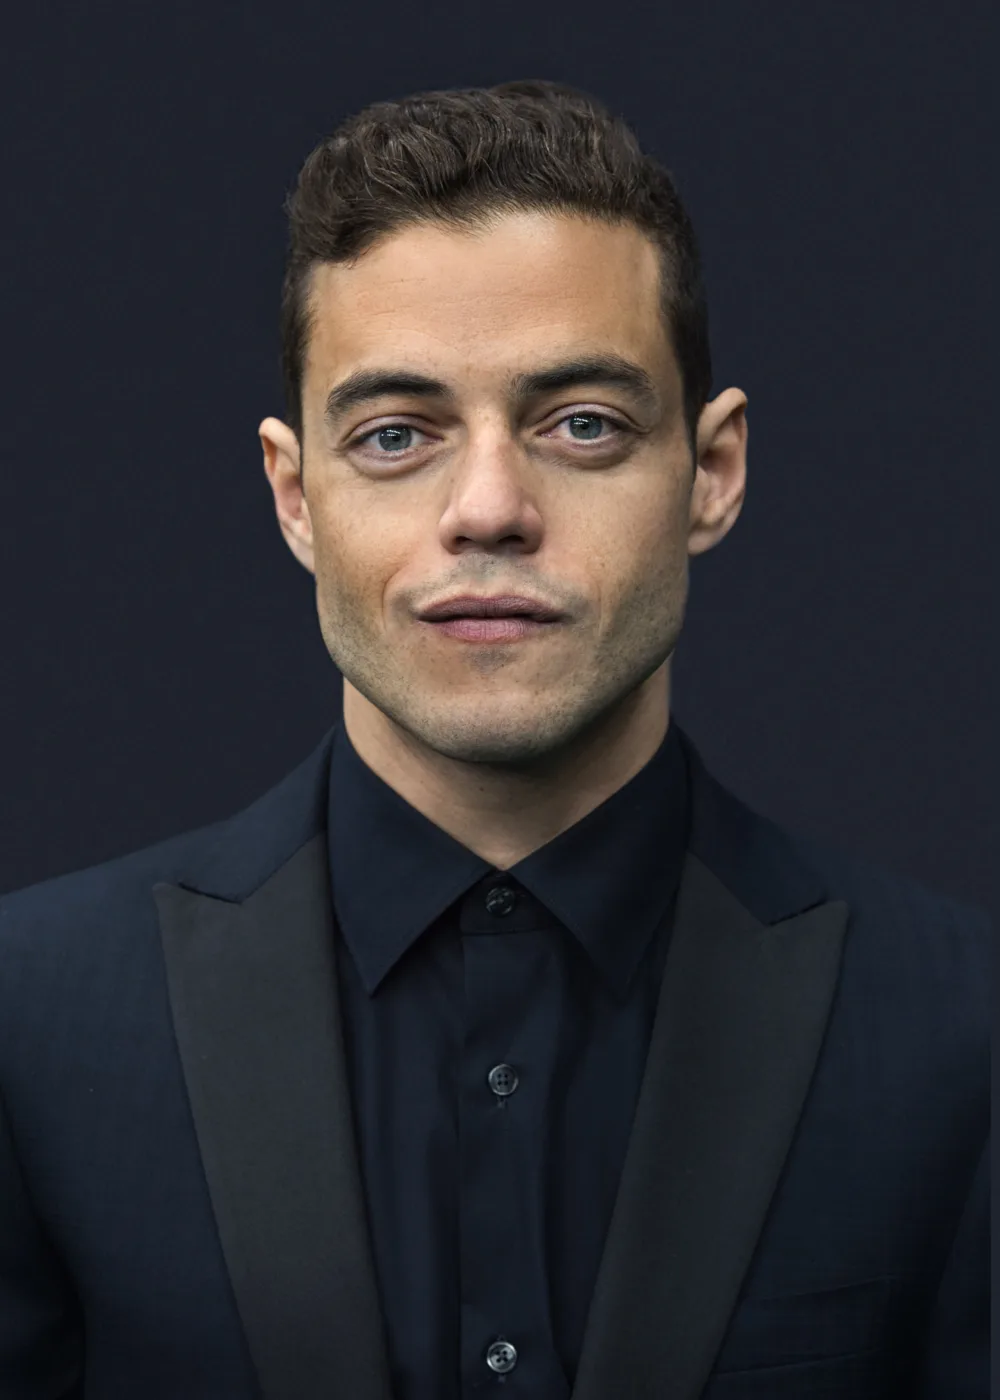 Rami Malek is an American actor known for his transformative performances on both television and film. Born on May 12, 1981, in Los Angeles, California, Malek began his acting career in the early 2000s and rose to prominence with his role as Elliot Alderson in the critically acclaimed television series Mr. Robot. Malek is known for his ability to disappear into his roles and bring a deep sense of authenticity to his characters. He has received widespread critical acclaim for his performances in films such as Bohemian Rhapsody, where he portrayed the iconic musician Freddie Mercury, and No Time to Die, the latest installment in the James Bond film series. In addition to his acting work, Malek is also a passionate advocate for social justice and has used his platform to speak out on issues such as climate change and human rights. He has partnered with organizations such as the United Nations and the World Wildlife Fund to raise awareness and promote positive change. With his talent, intelligence, and dedication to making a positive impact in the world, Malek has become a beloved and influential figure in the entertainment industry, inspiring fans around the world with his performances and his advocacy work.